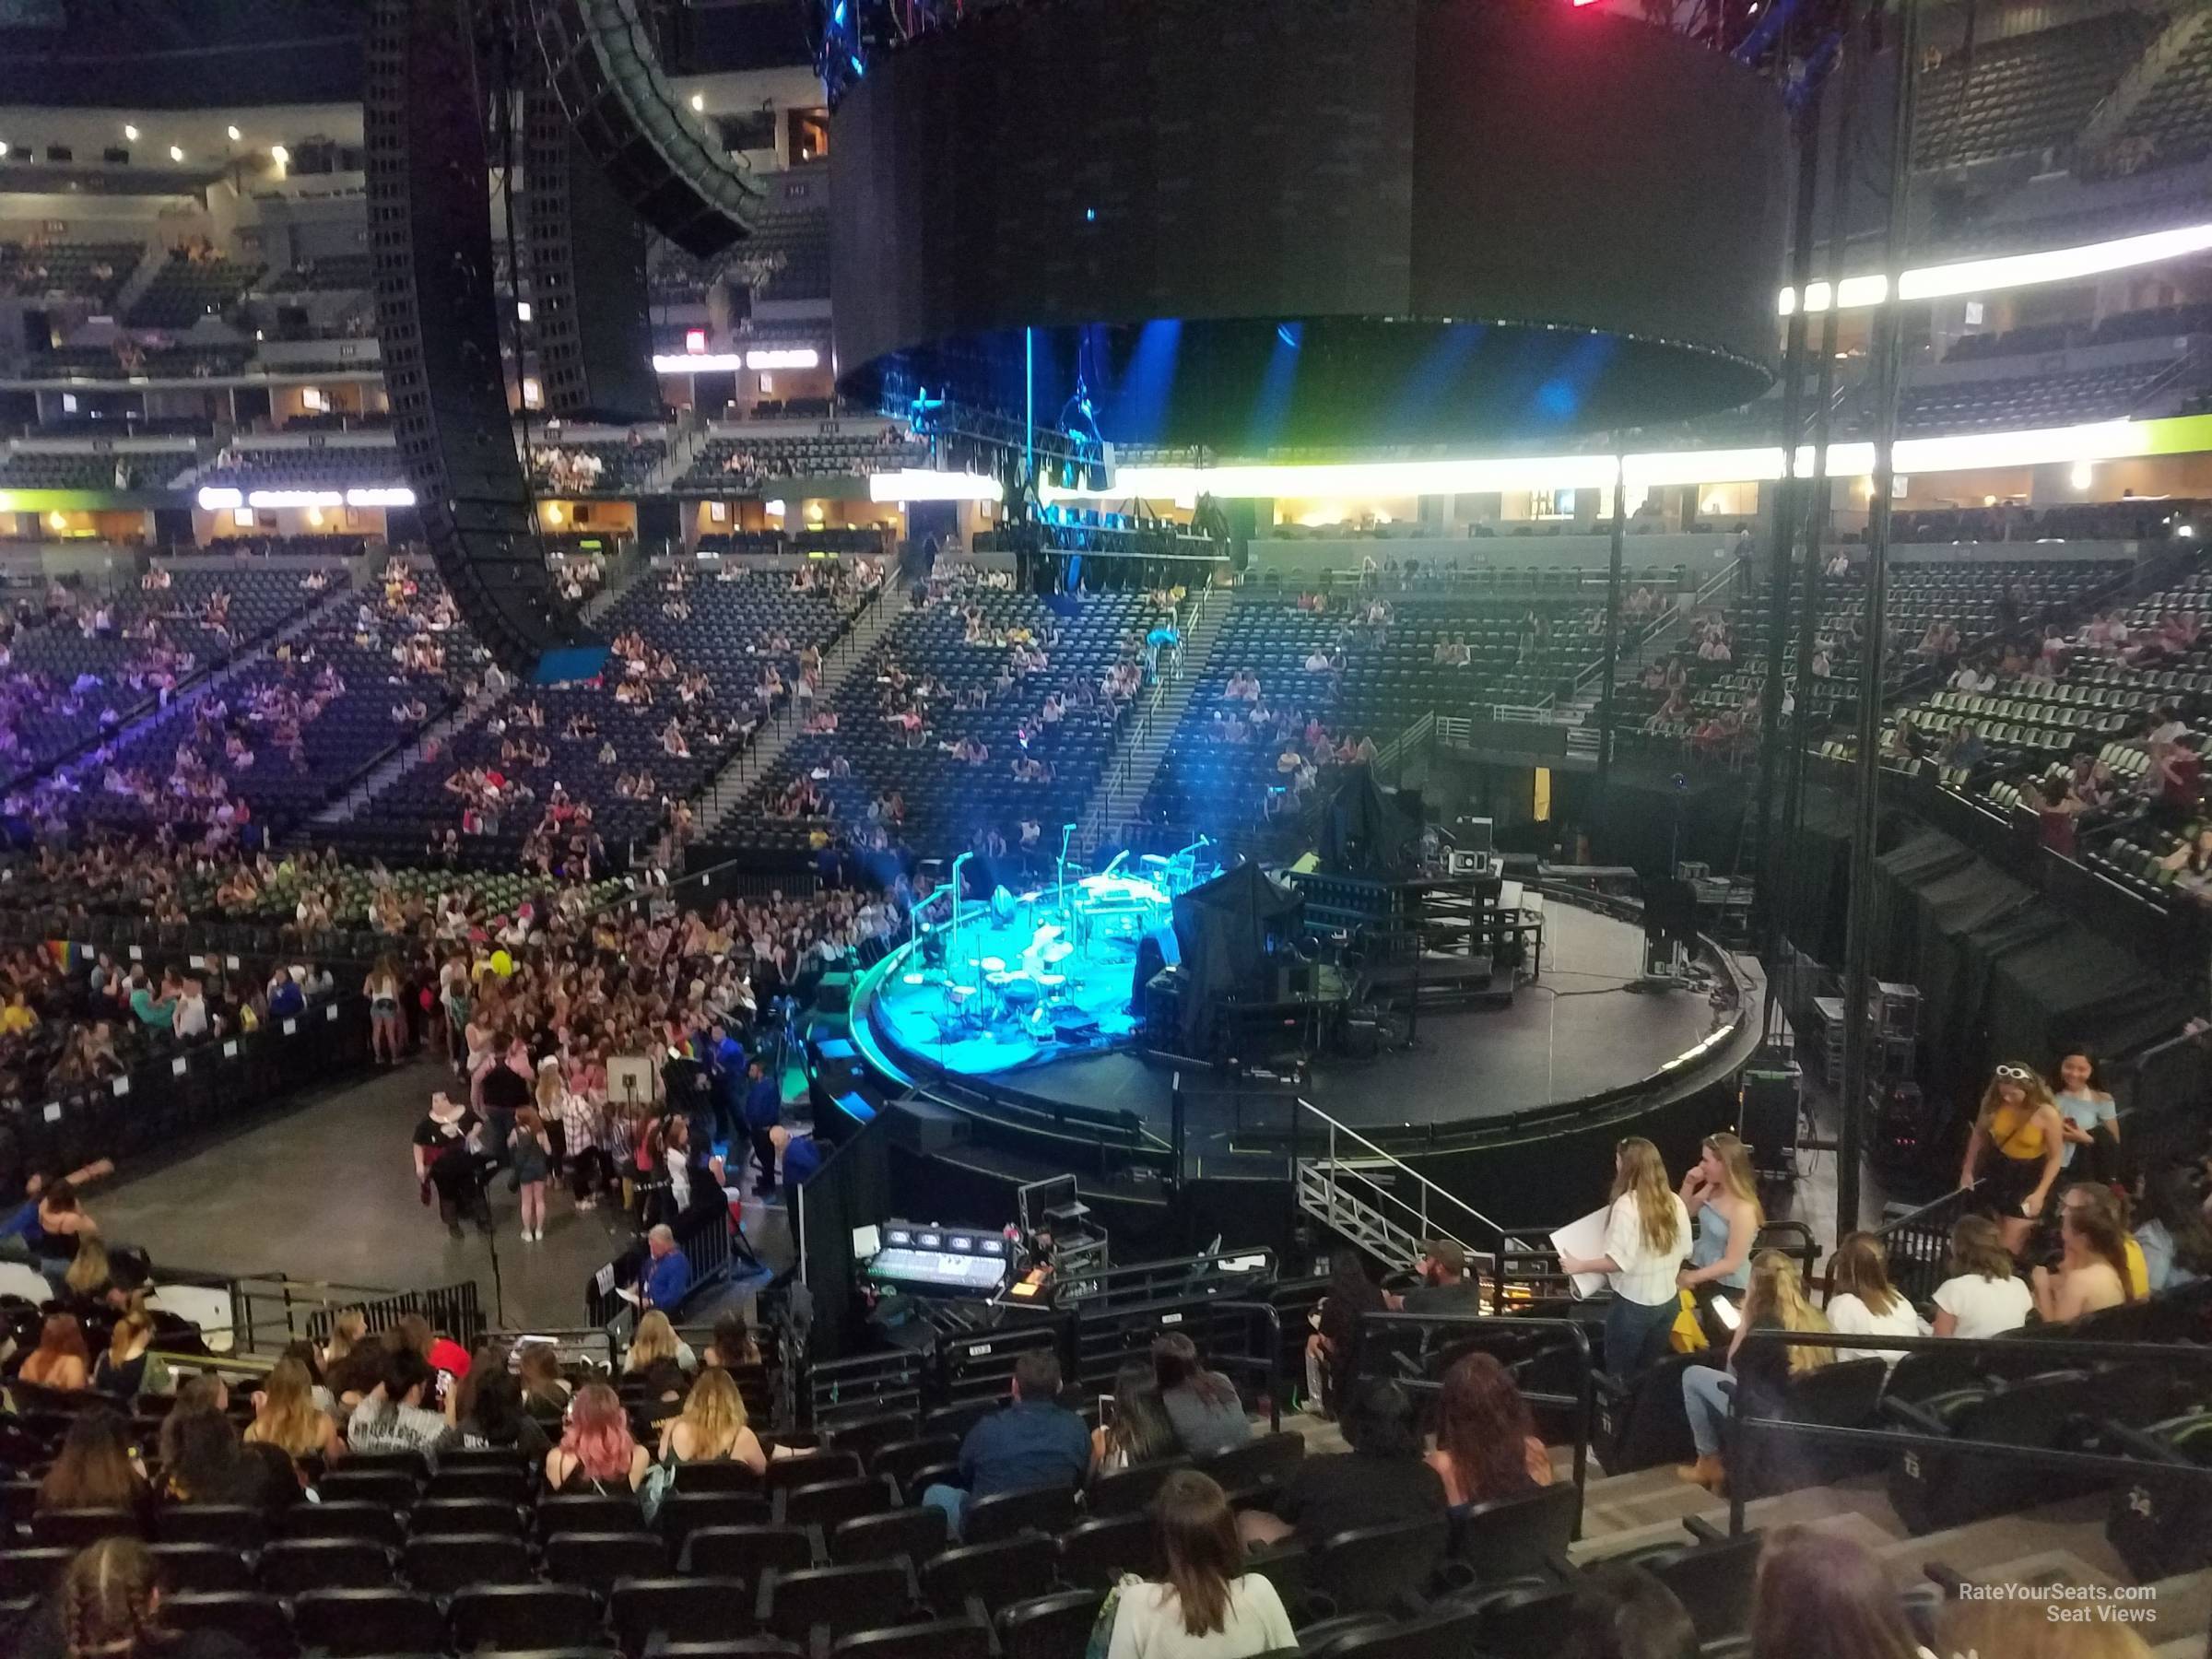 section 144, row 19 seat view  for concert - ball arena